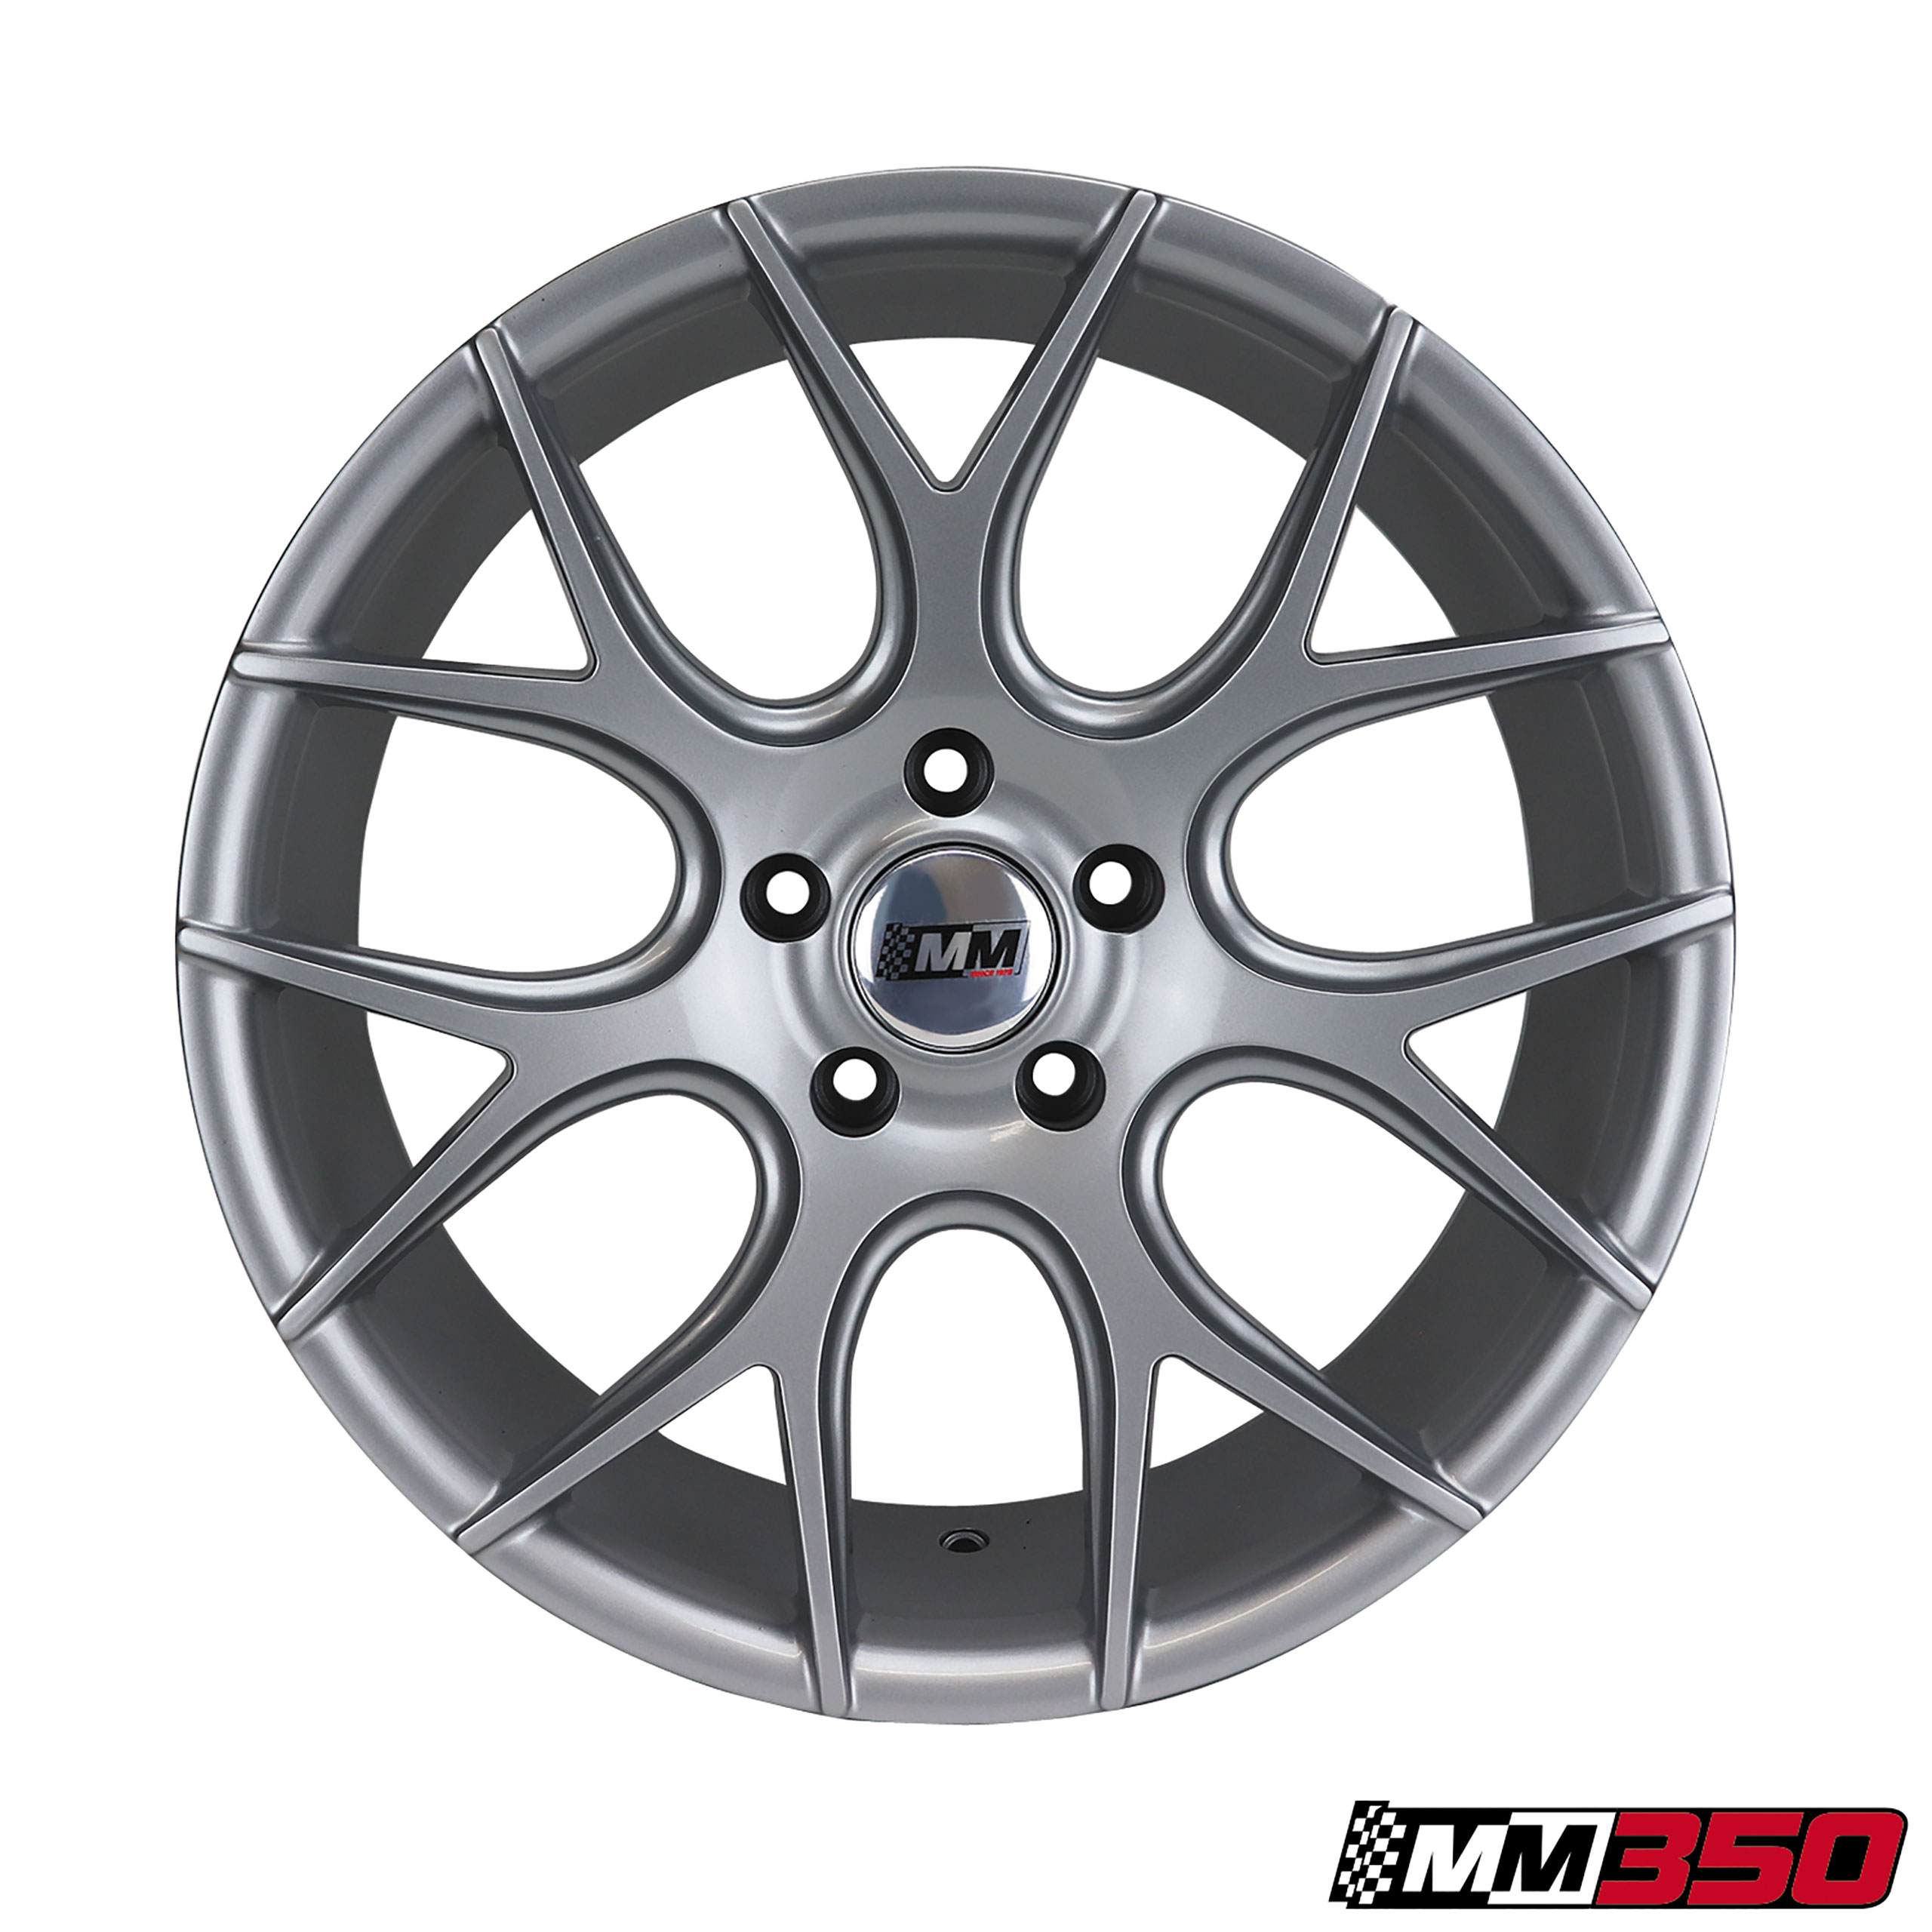 1979-2014 Ford Mustang C3-C4-C5 MM350 18x8 Wheel - Silver CA-MA8091 